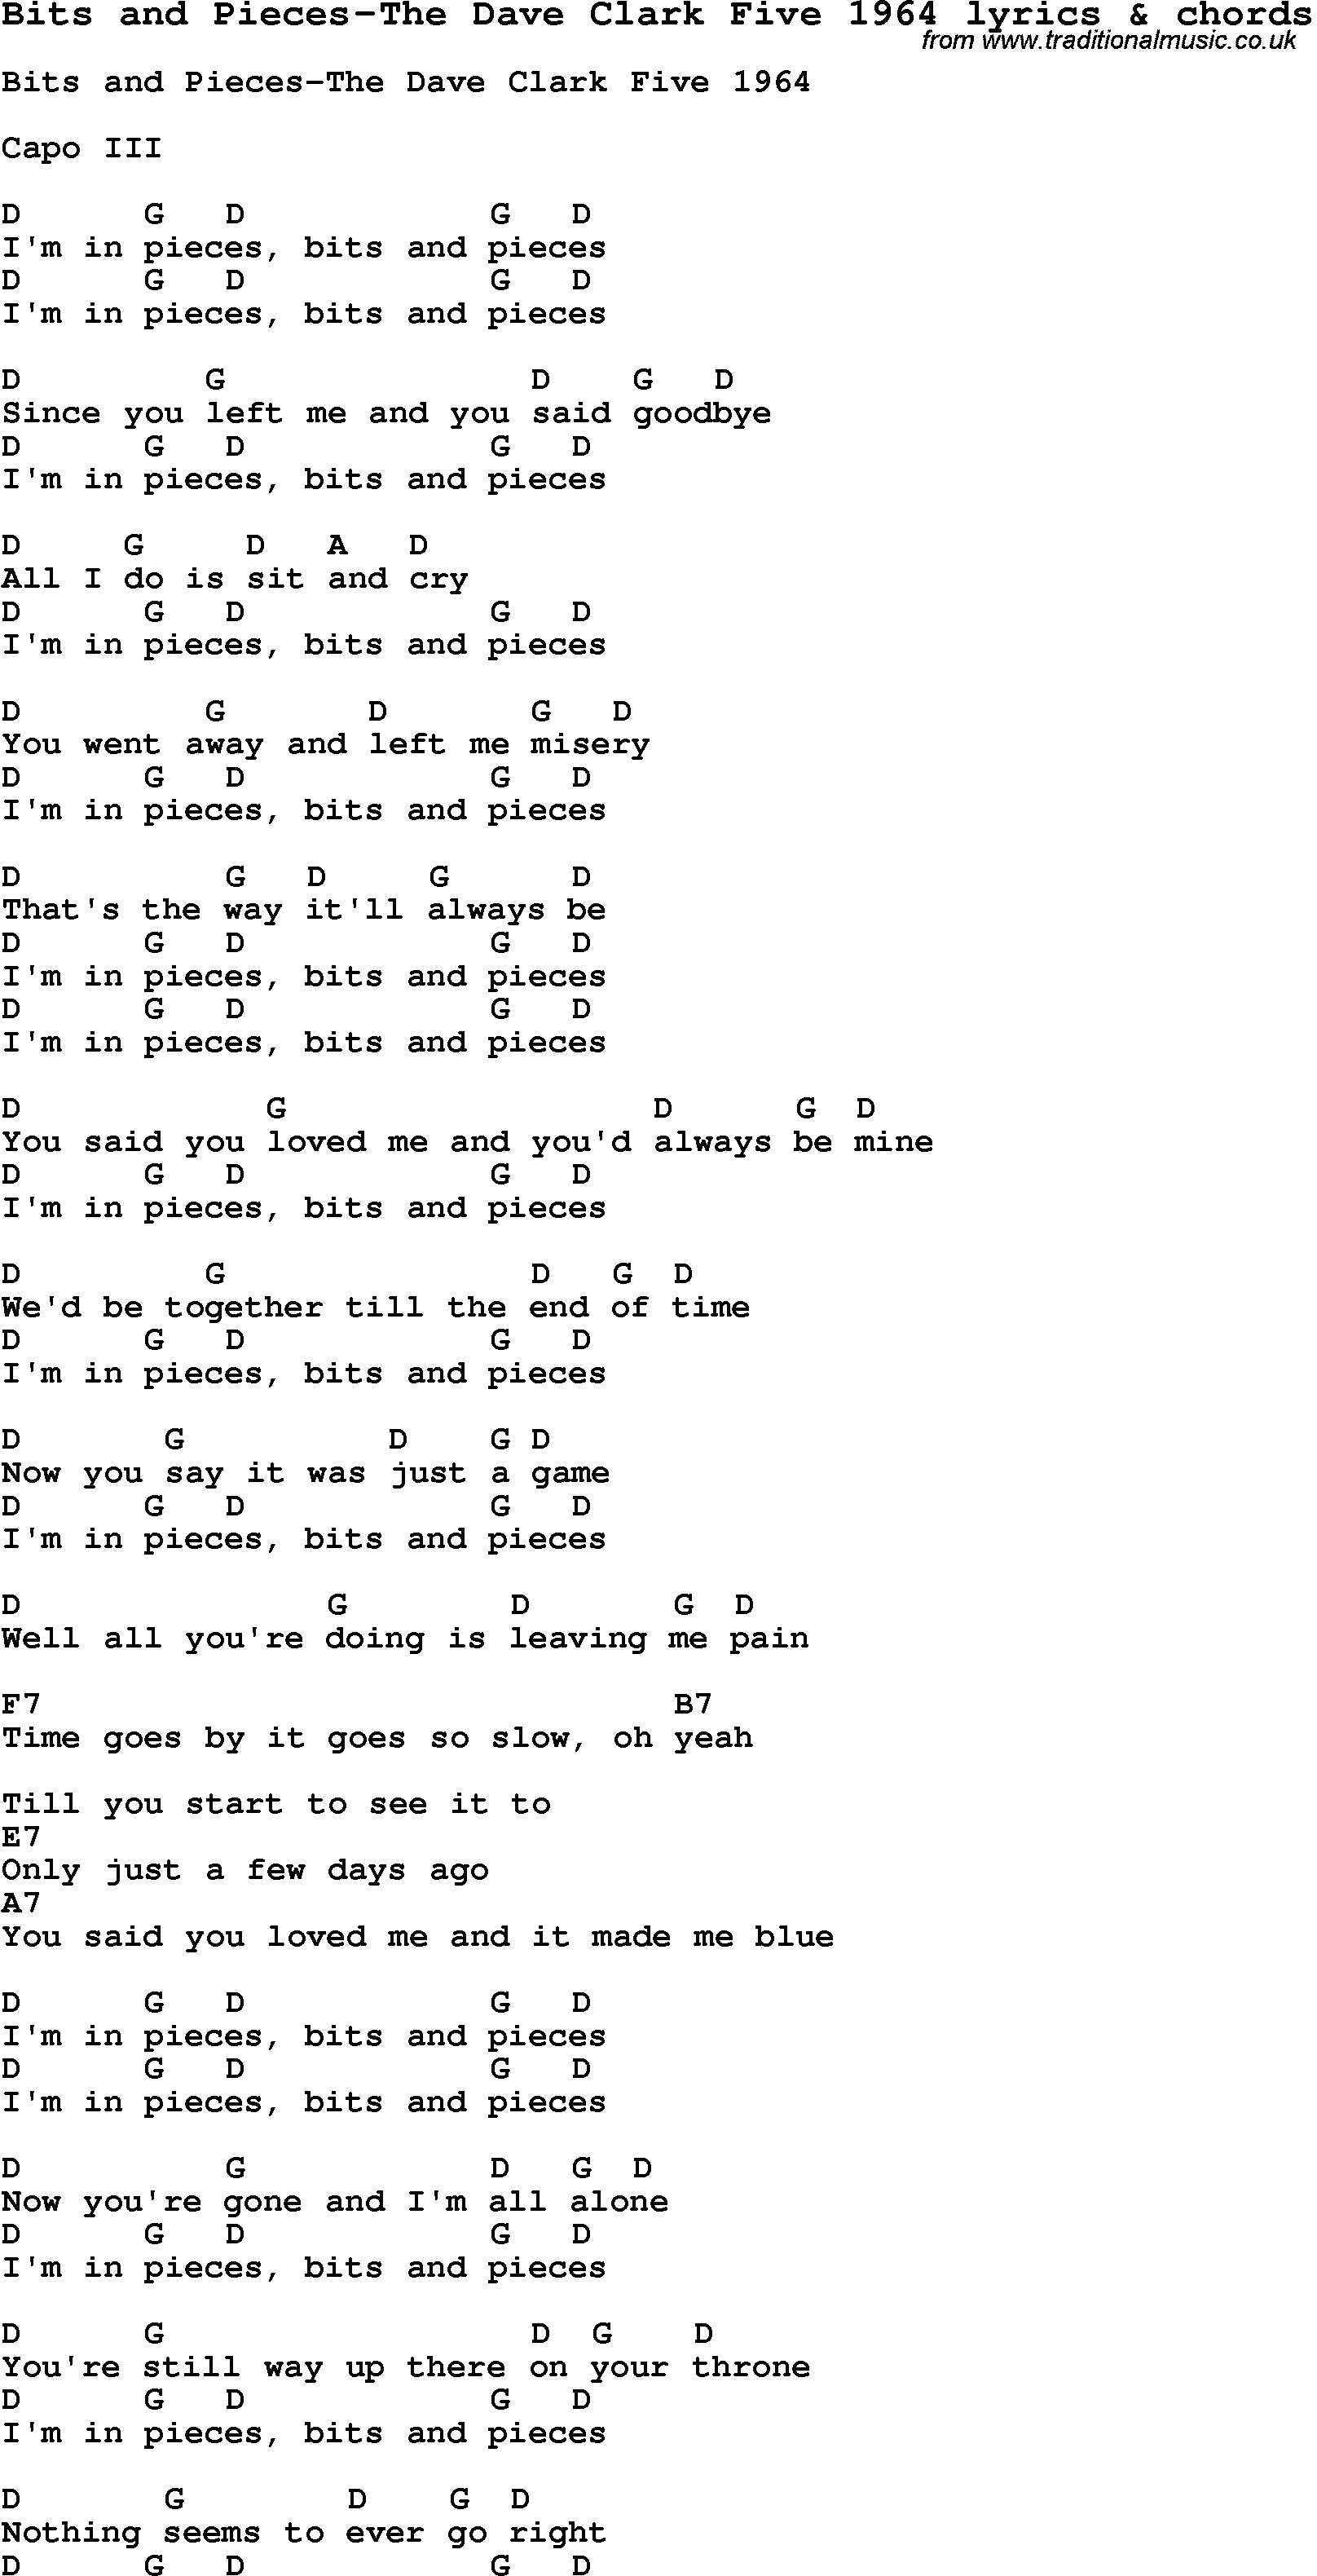 Love Song Lyrics for: Bits and Pieces-The Dave Clark Five 1964 with chords for Ukulele, Guitar Banjo etc.